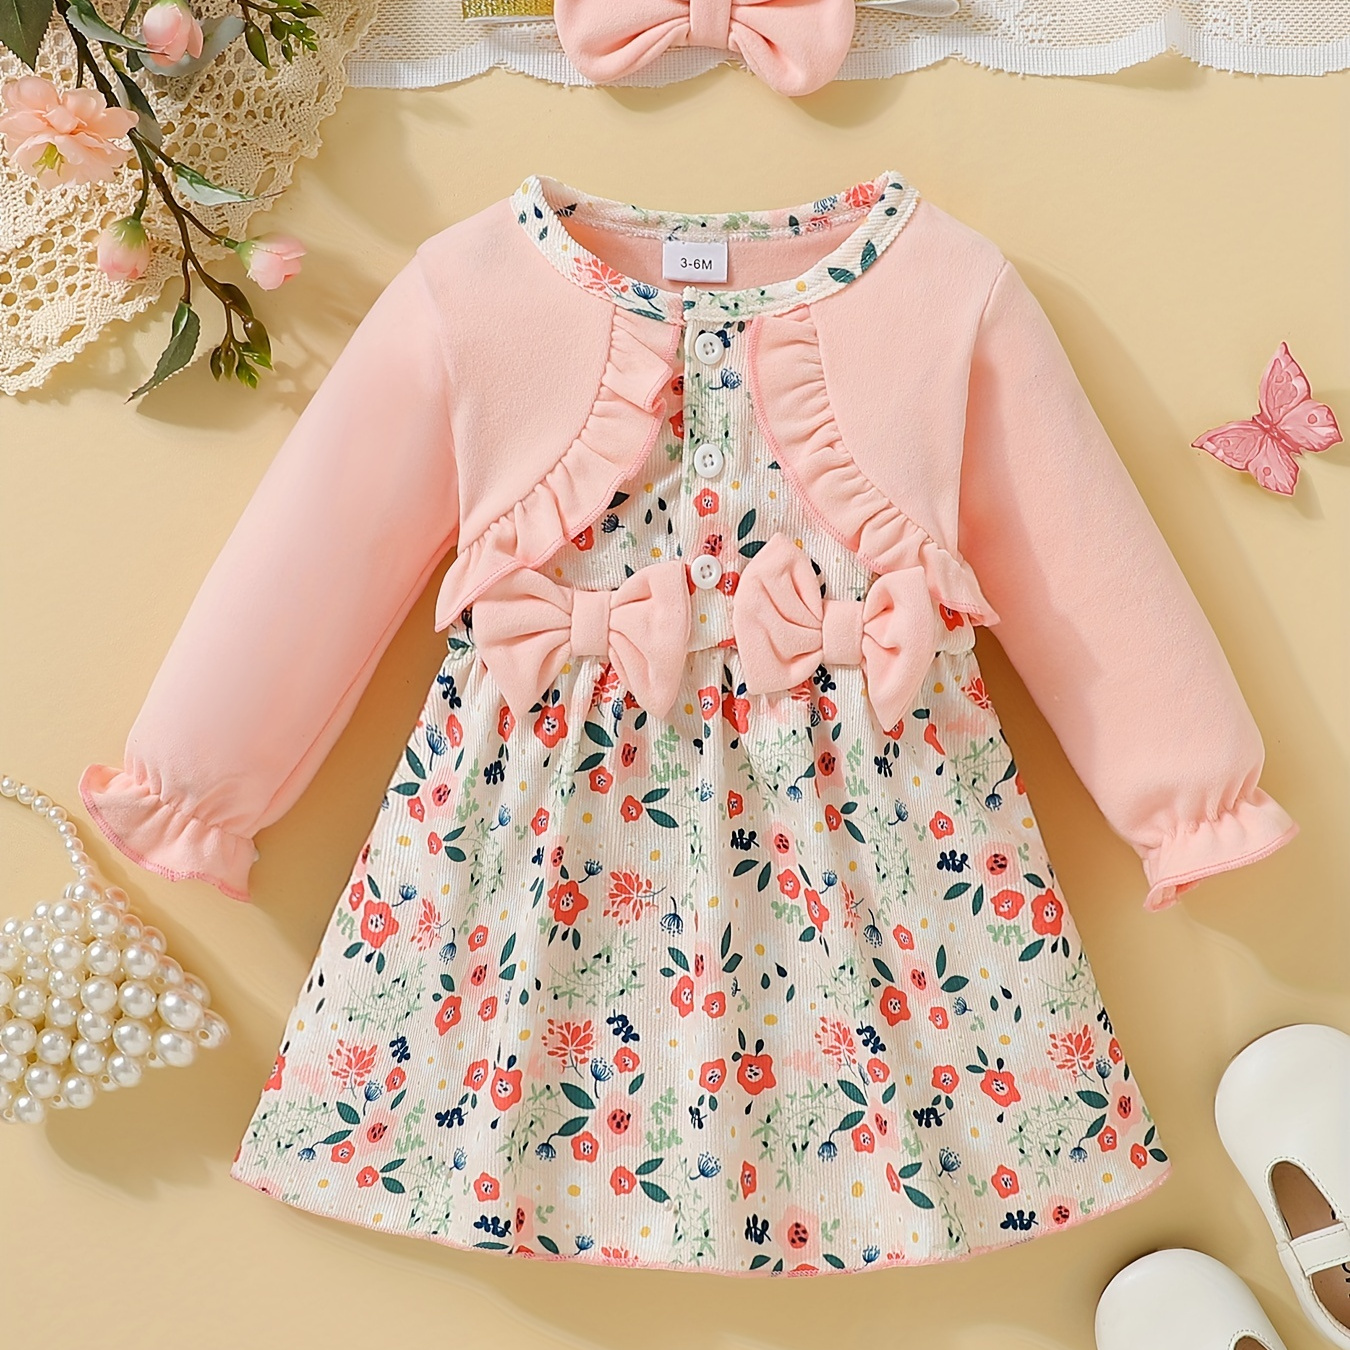 

Toddler Baby Girls Sweet Long Sleeve Floral Print Princess Dresses With Bowknot, Kid's Party Casual Clothes